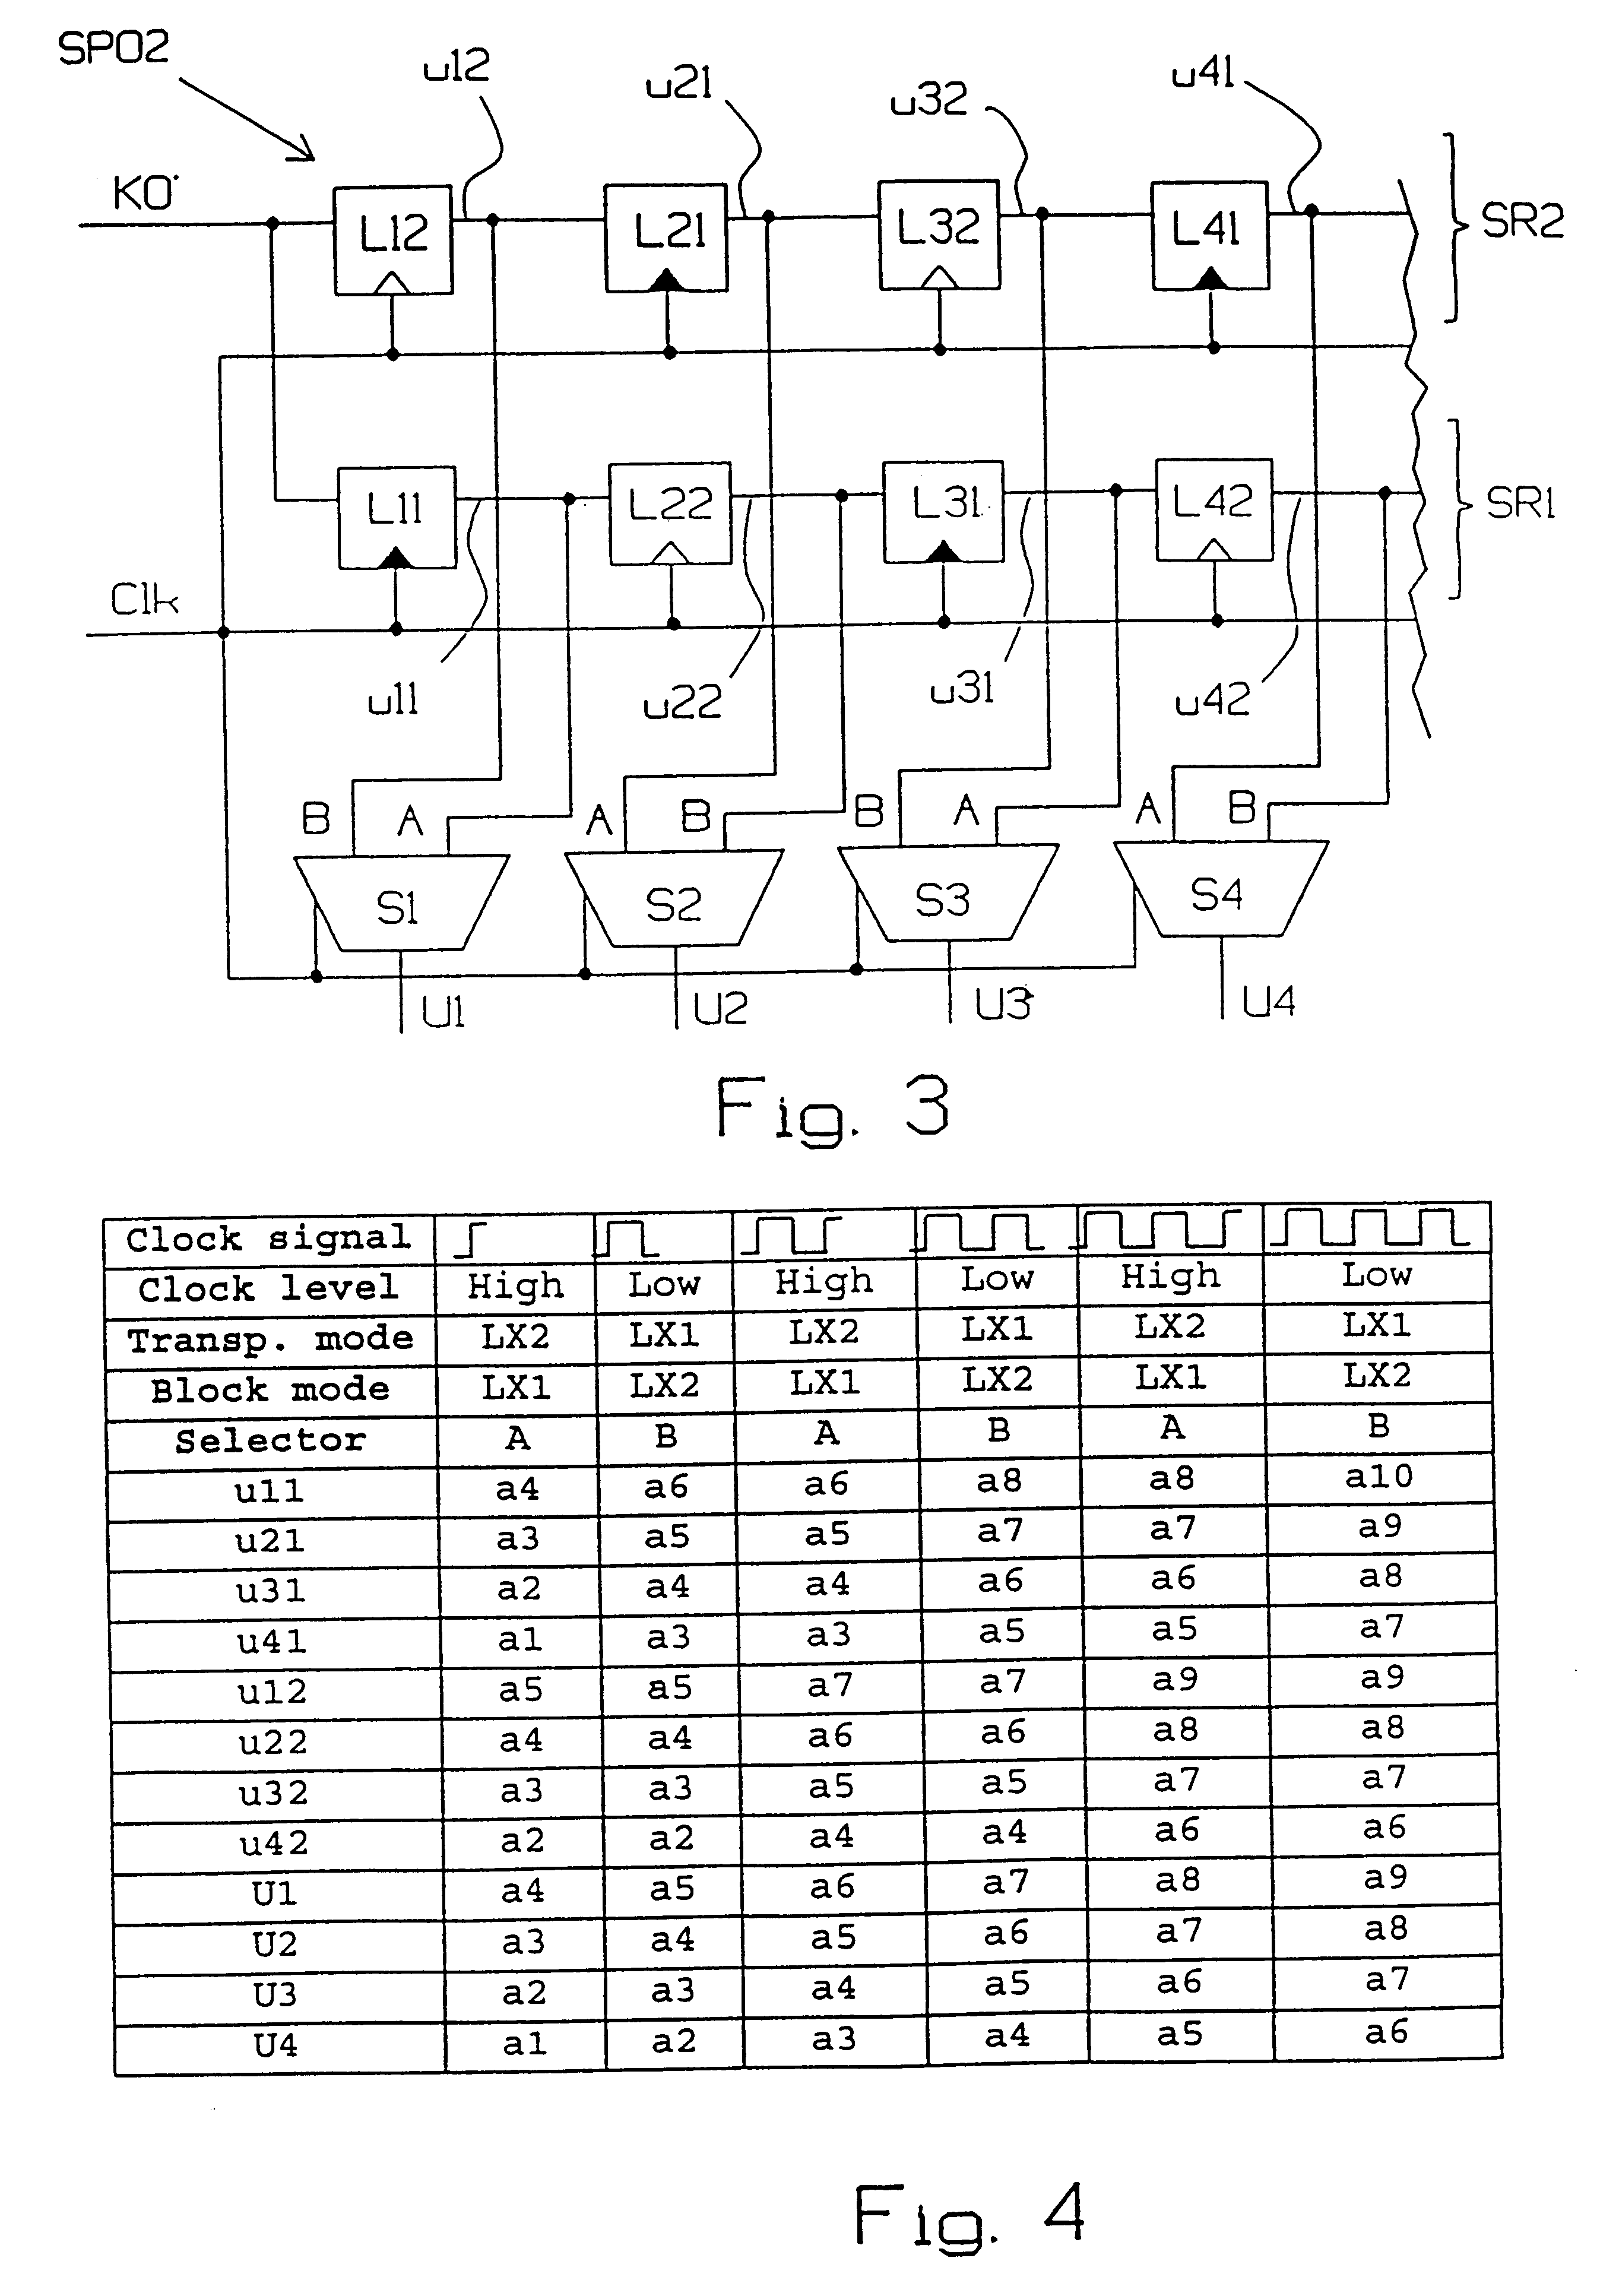 Method and apparatus for encoding/decoding n-bit data into 2n-bit codewords